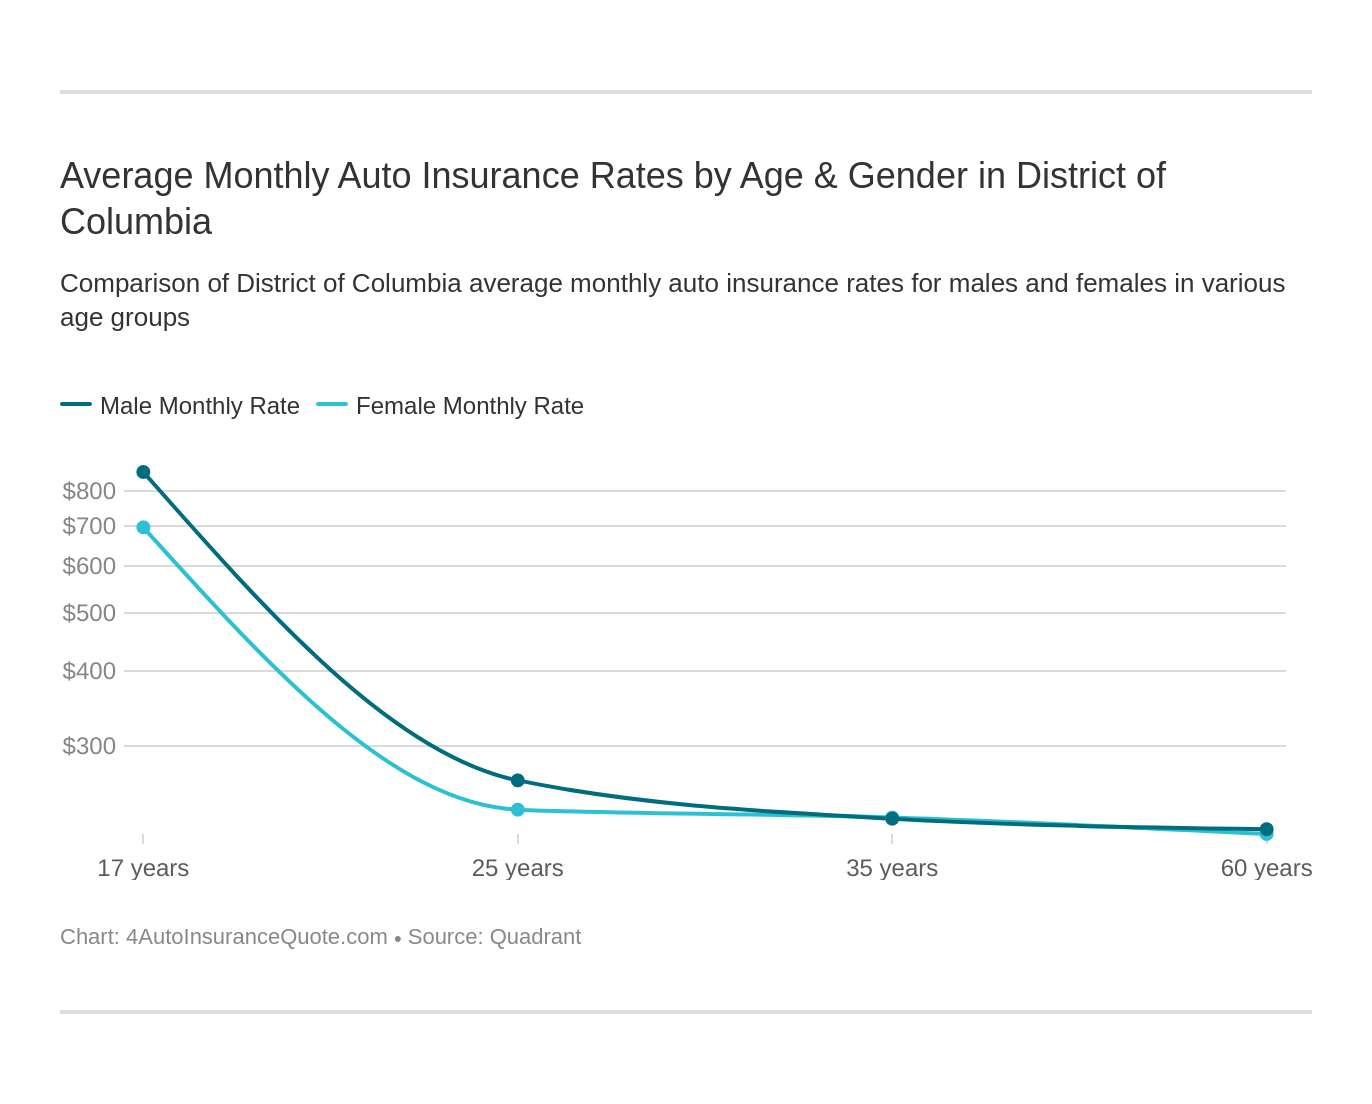 Average Monthly Auto Insurance Rates by Age & Gender in District of Columbia